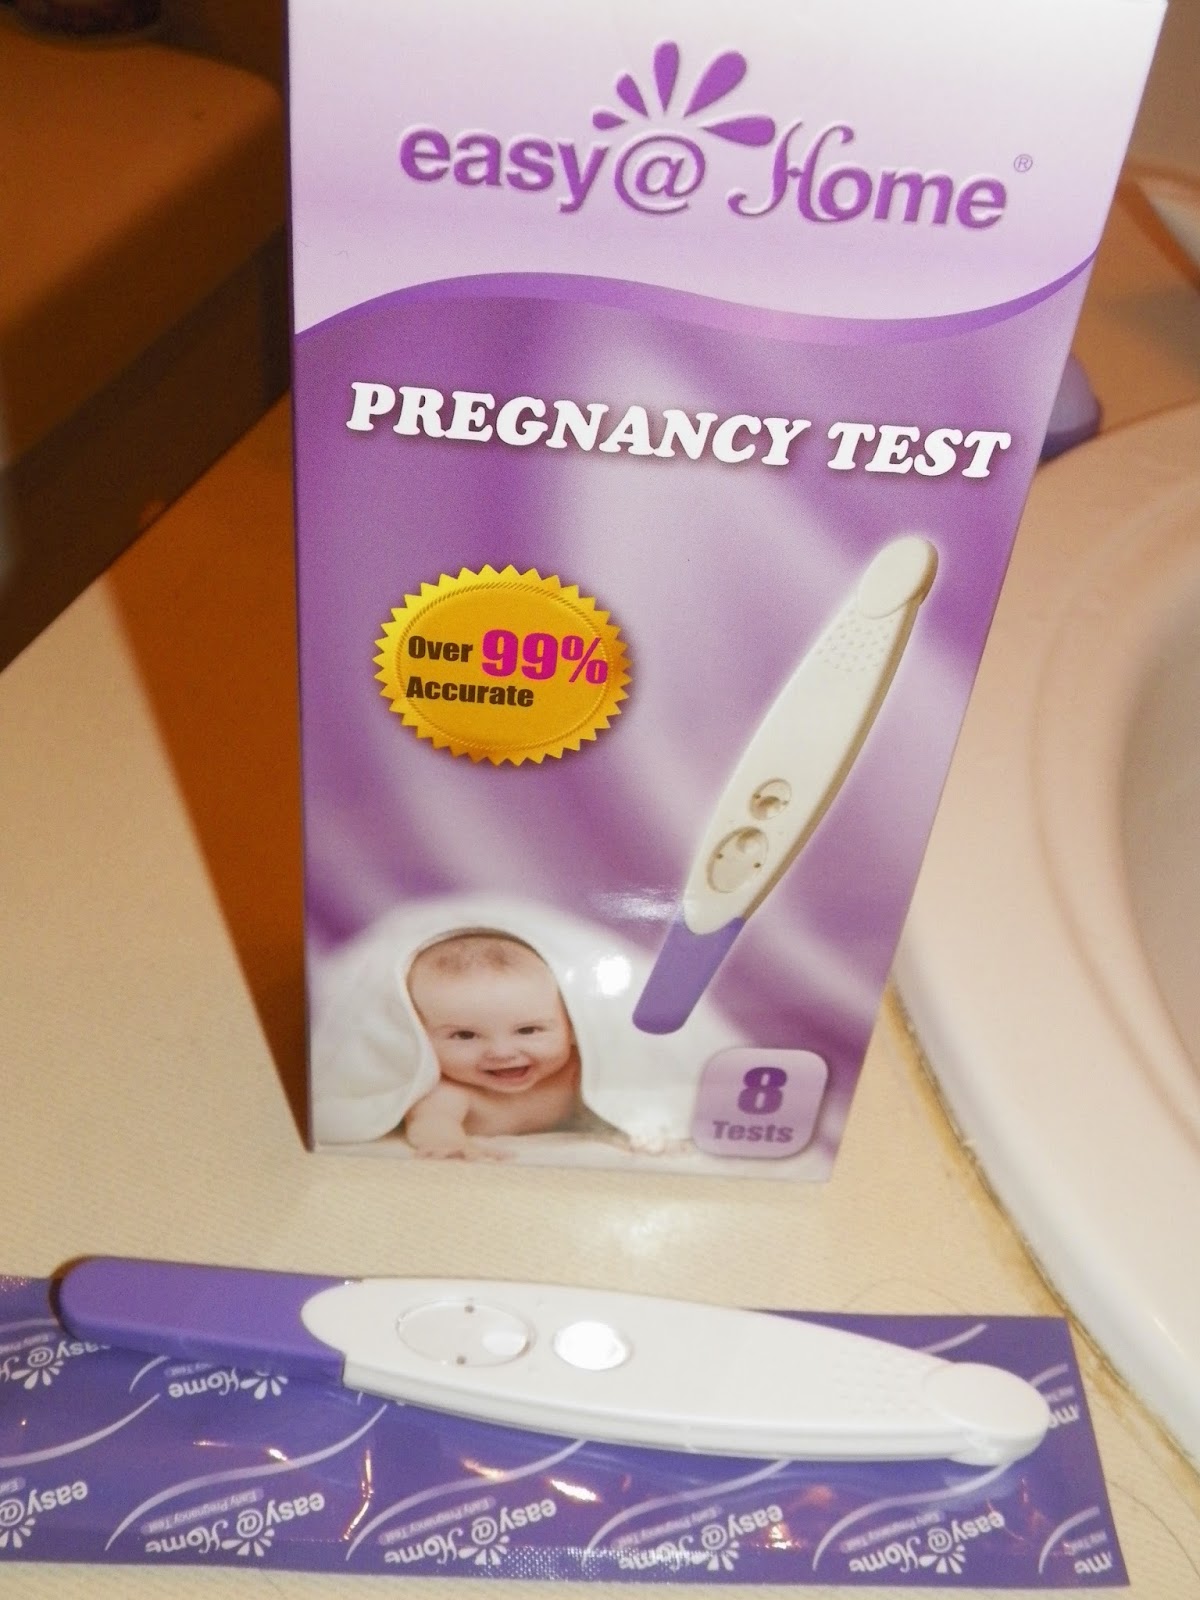 mygreatfinds: Easy@Home Early Pregnancy Test (Midstream ...